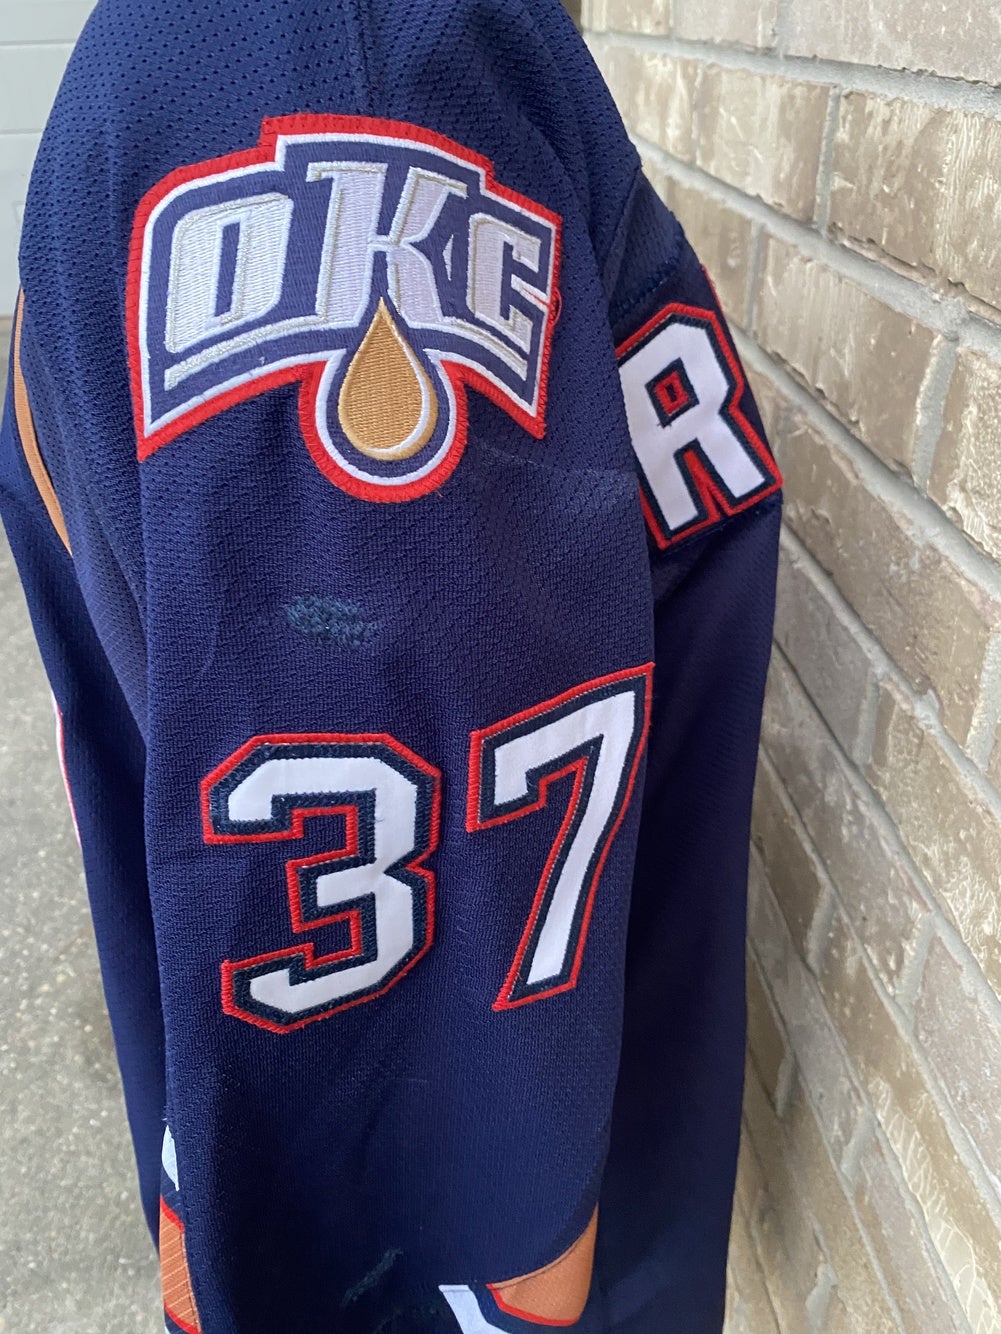 Every Sports Jersey Drake Has Ever Worn –